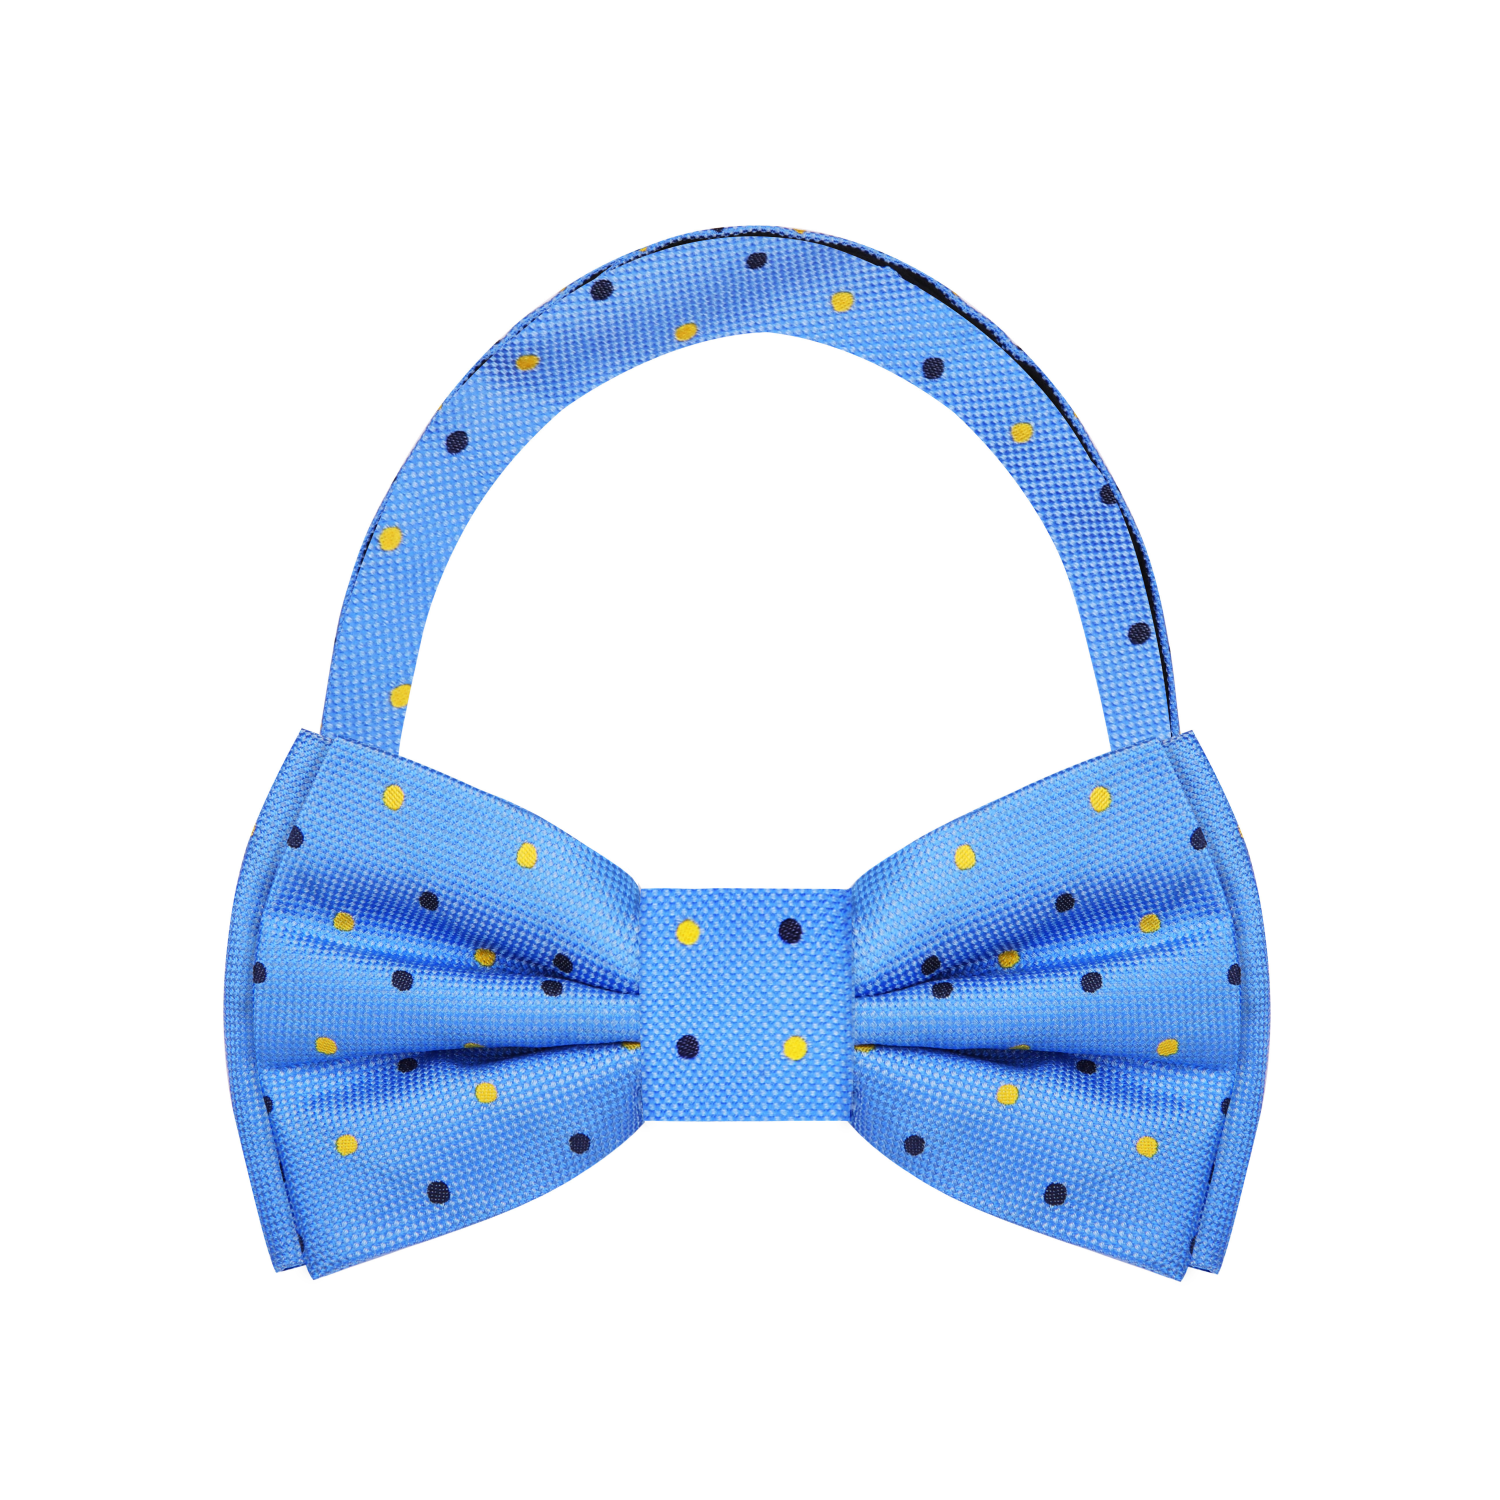 Light Blue with Dark Blue, Yellow Color Dots Bow Tie Pre Tied